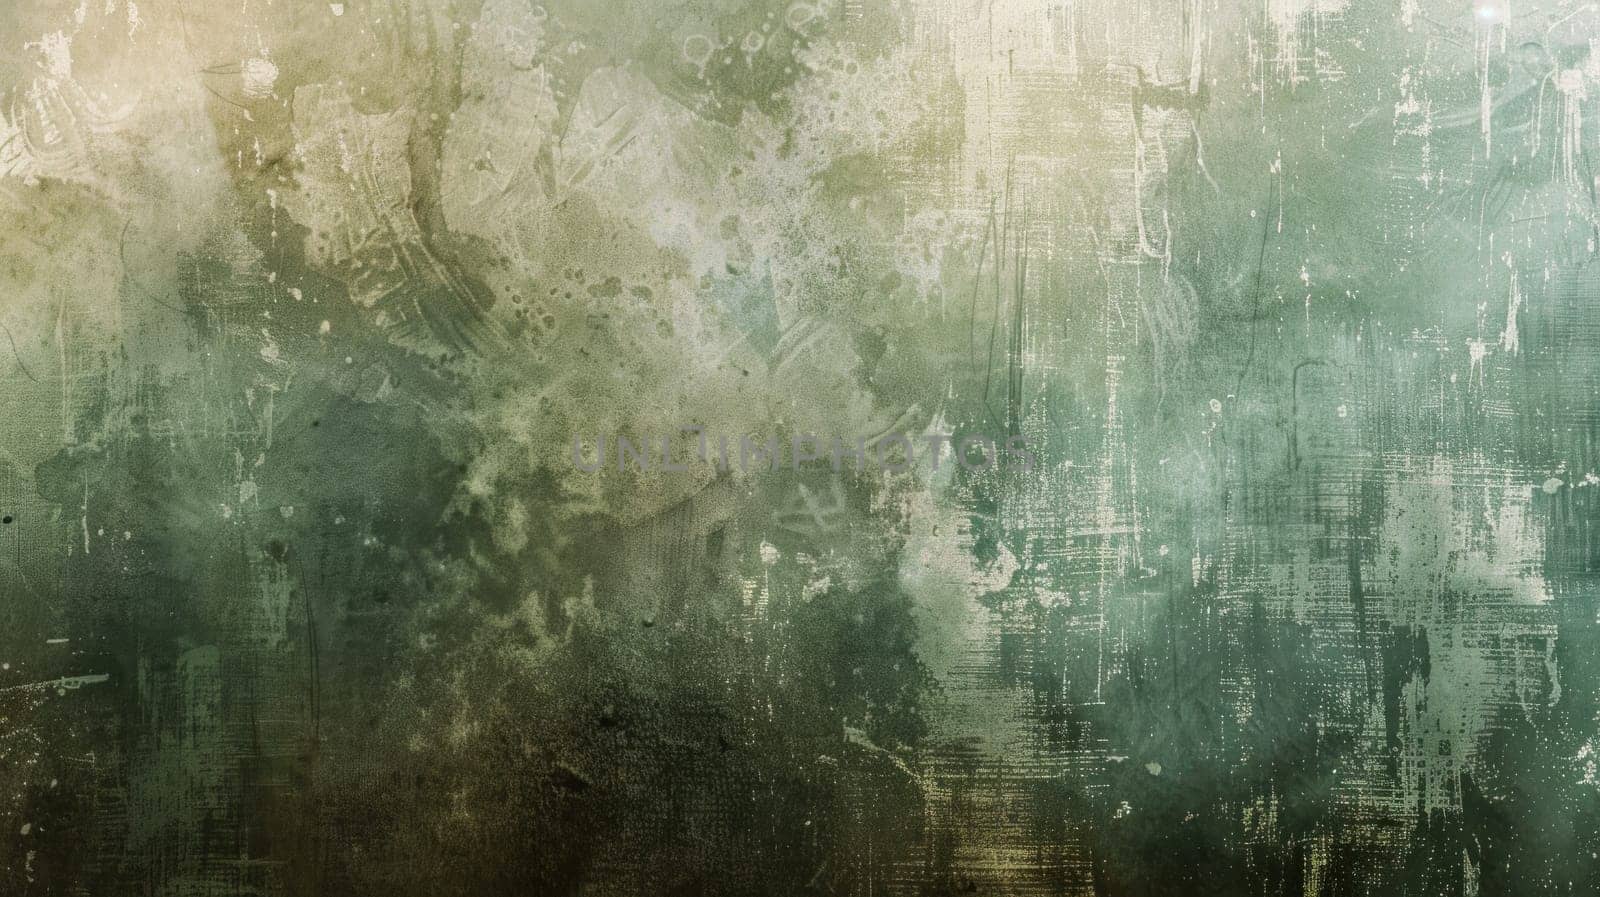 A wall with a green and brown background with a lot of texture. The wall appears to be old and worn, with a lot of dirt and grime. The texture of the wall is rough and uneven, giving it a sense of age